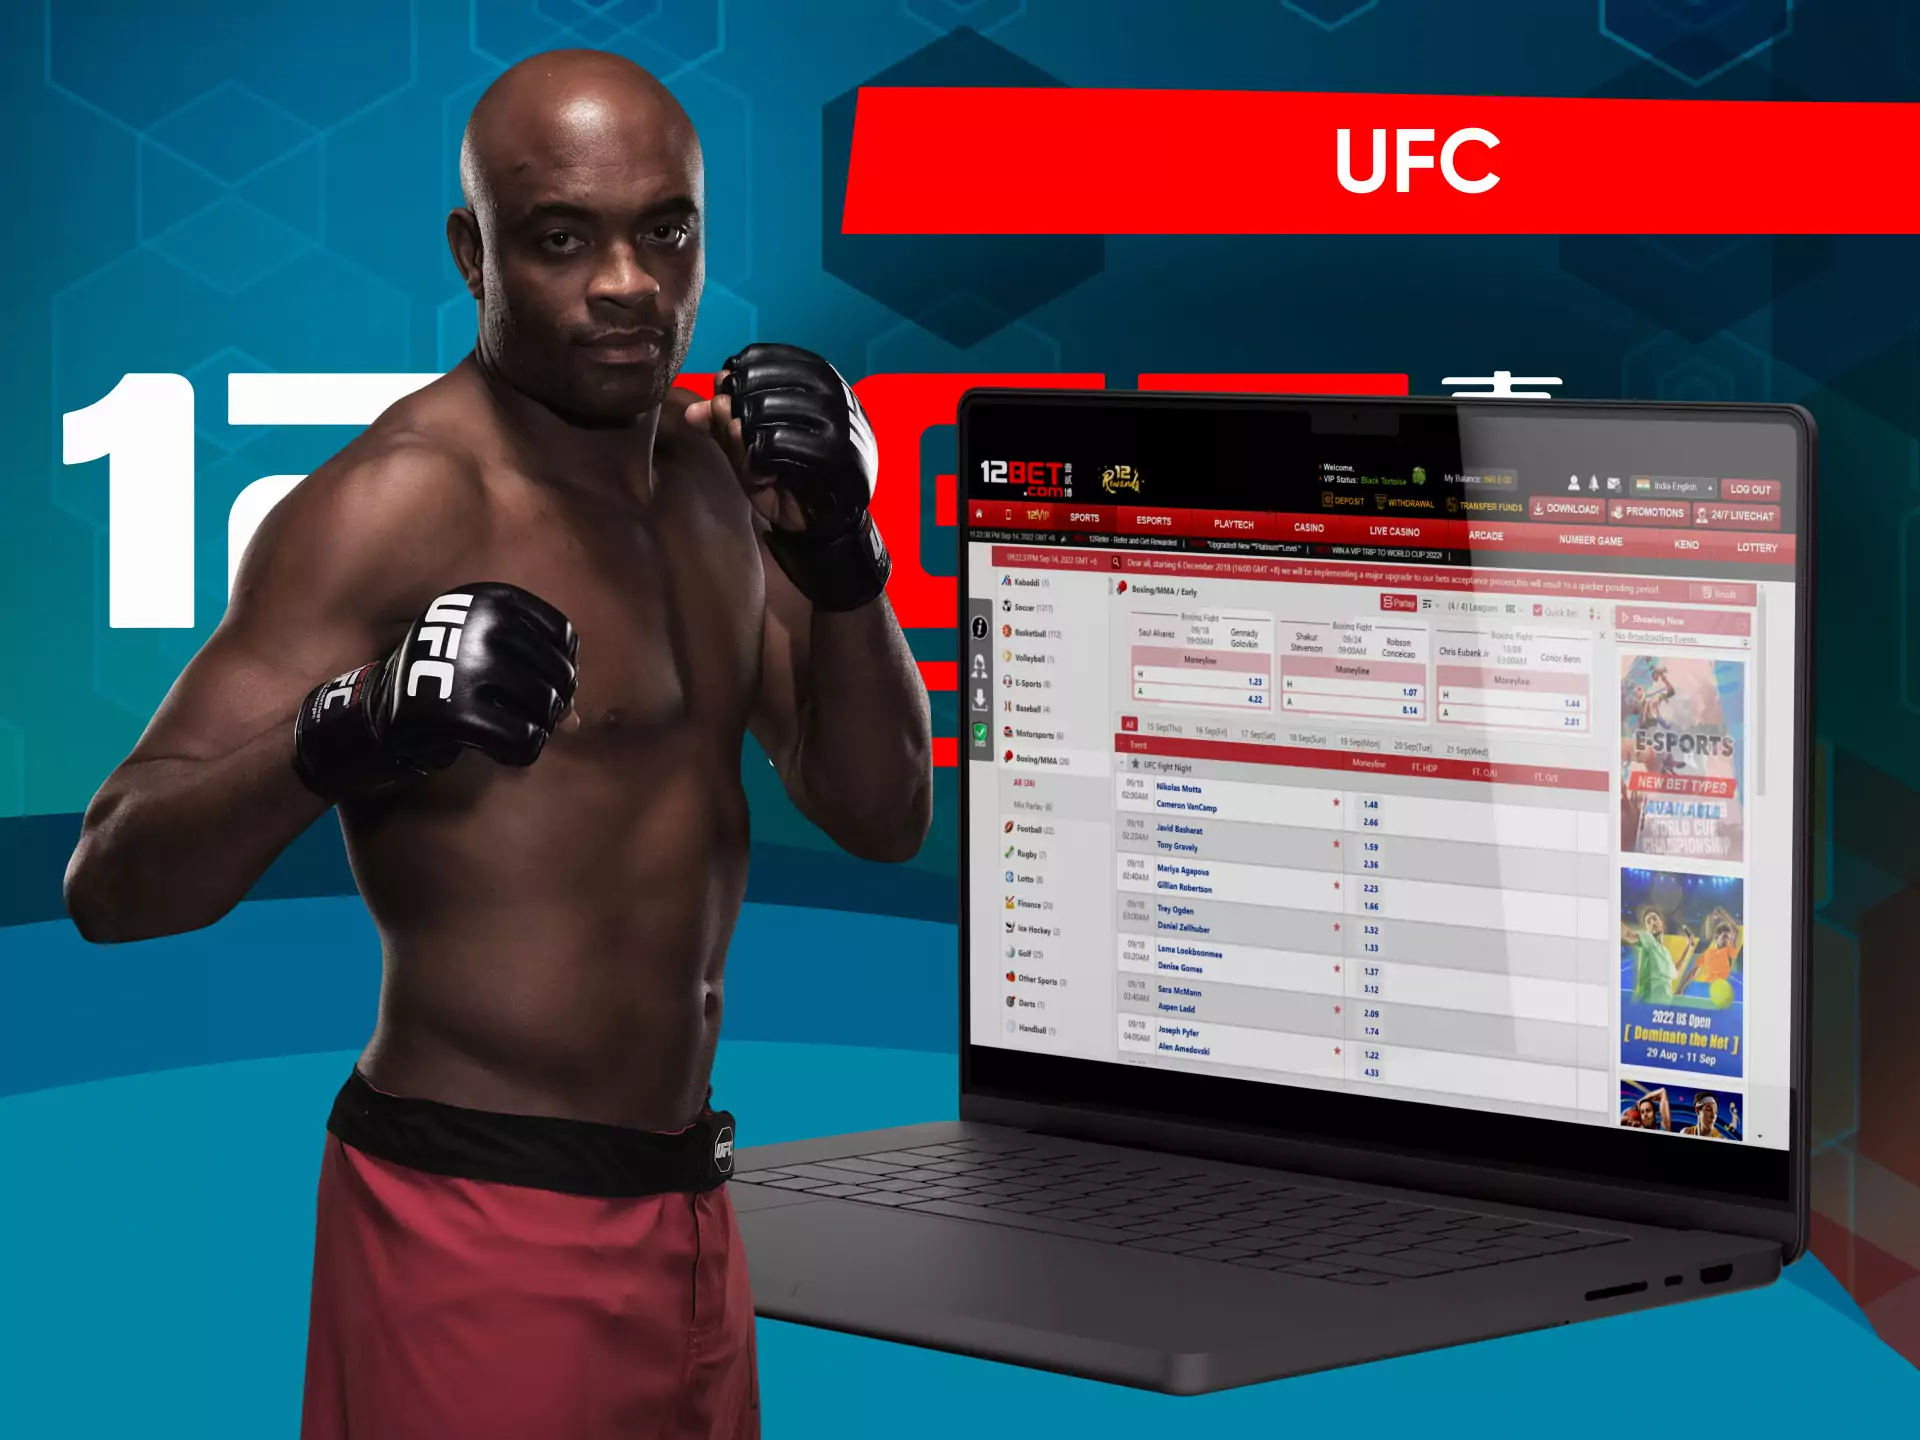 Besides all, there are lots of UFC fights available for betting on 12bet.